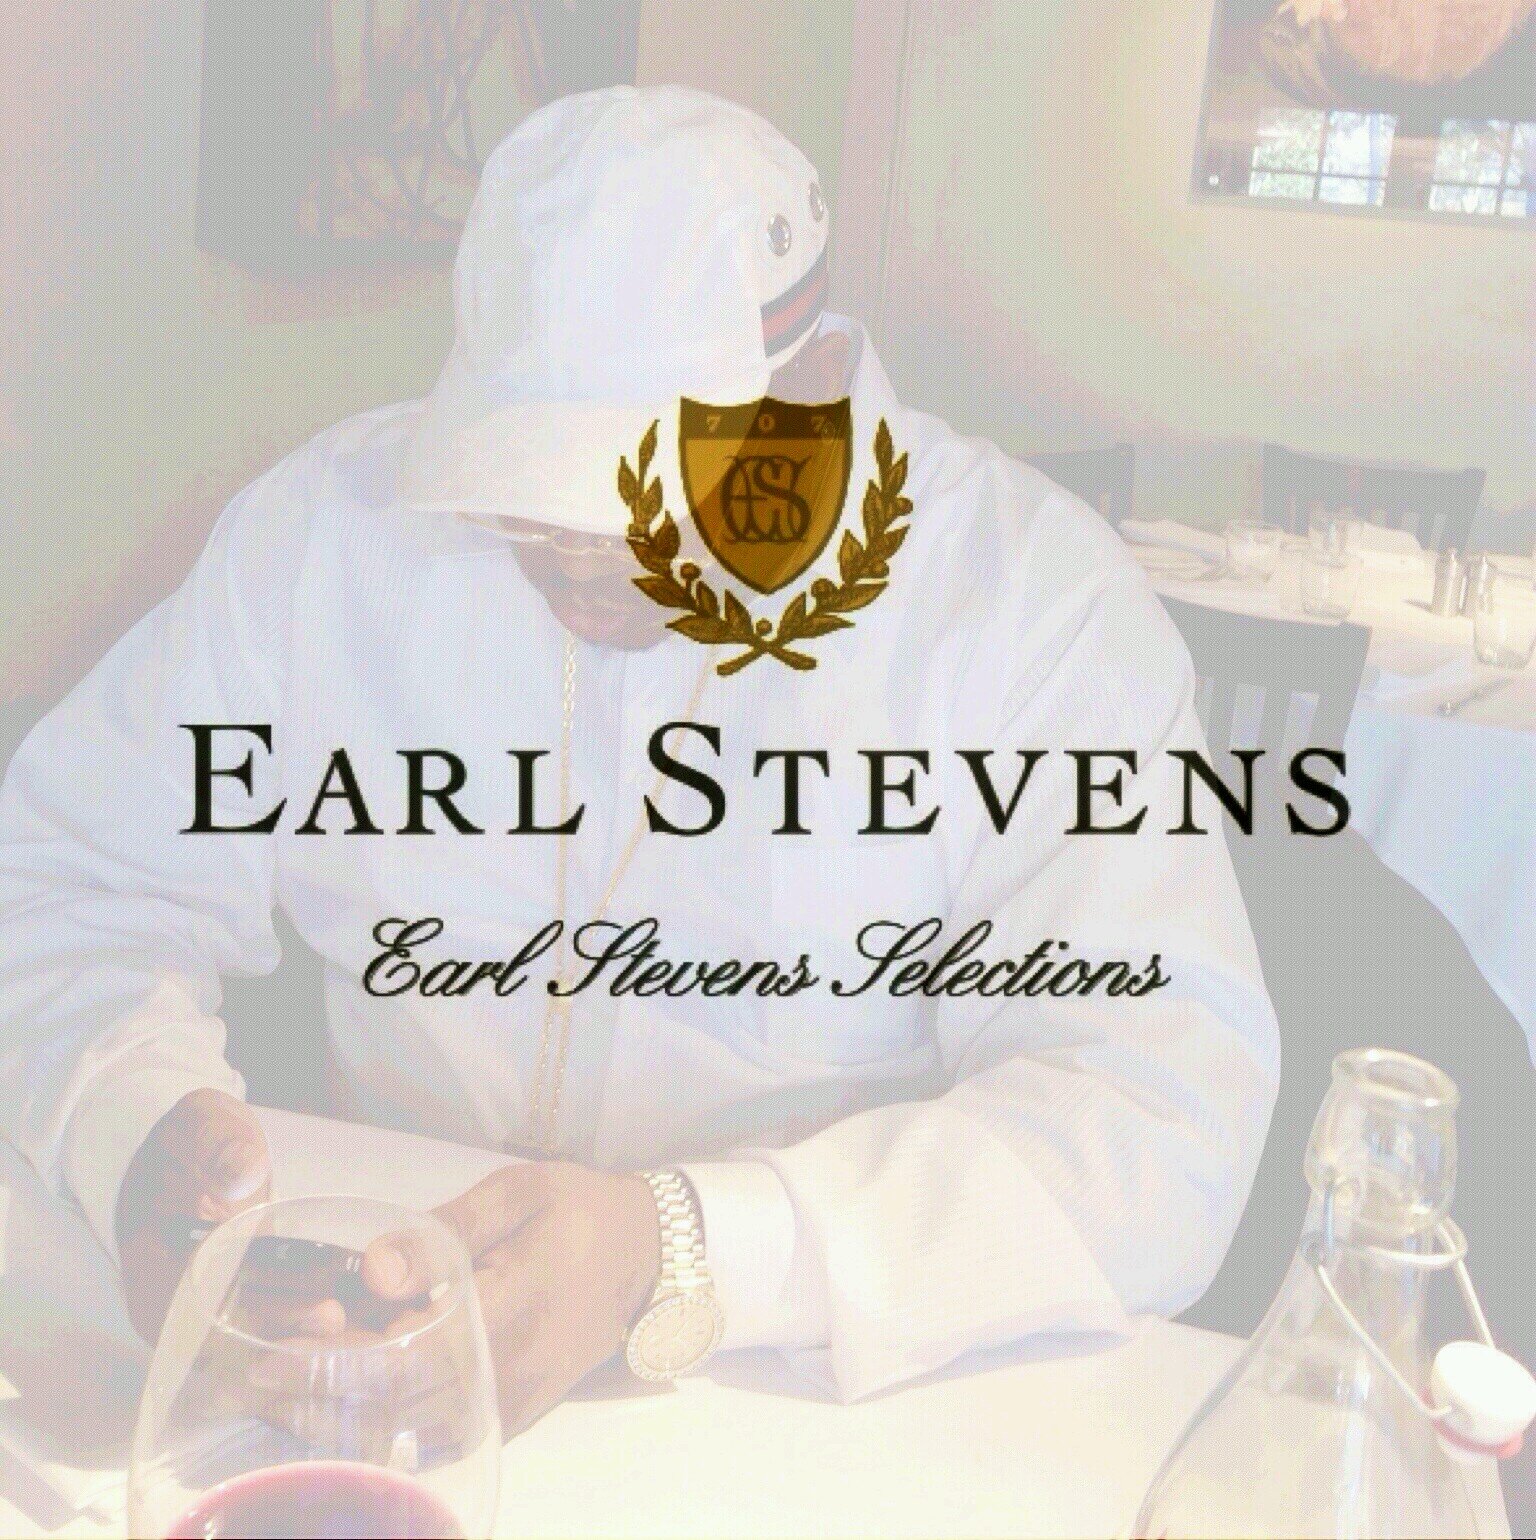 Earl Stevens a platinum selling recording artist/actor from Vallejo California BKA E-40. I'm a wine connoisseur, so I decided to make my own